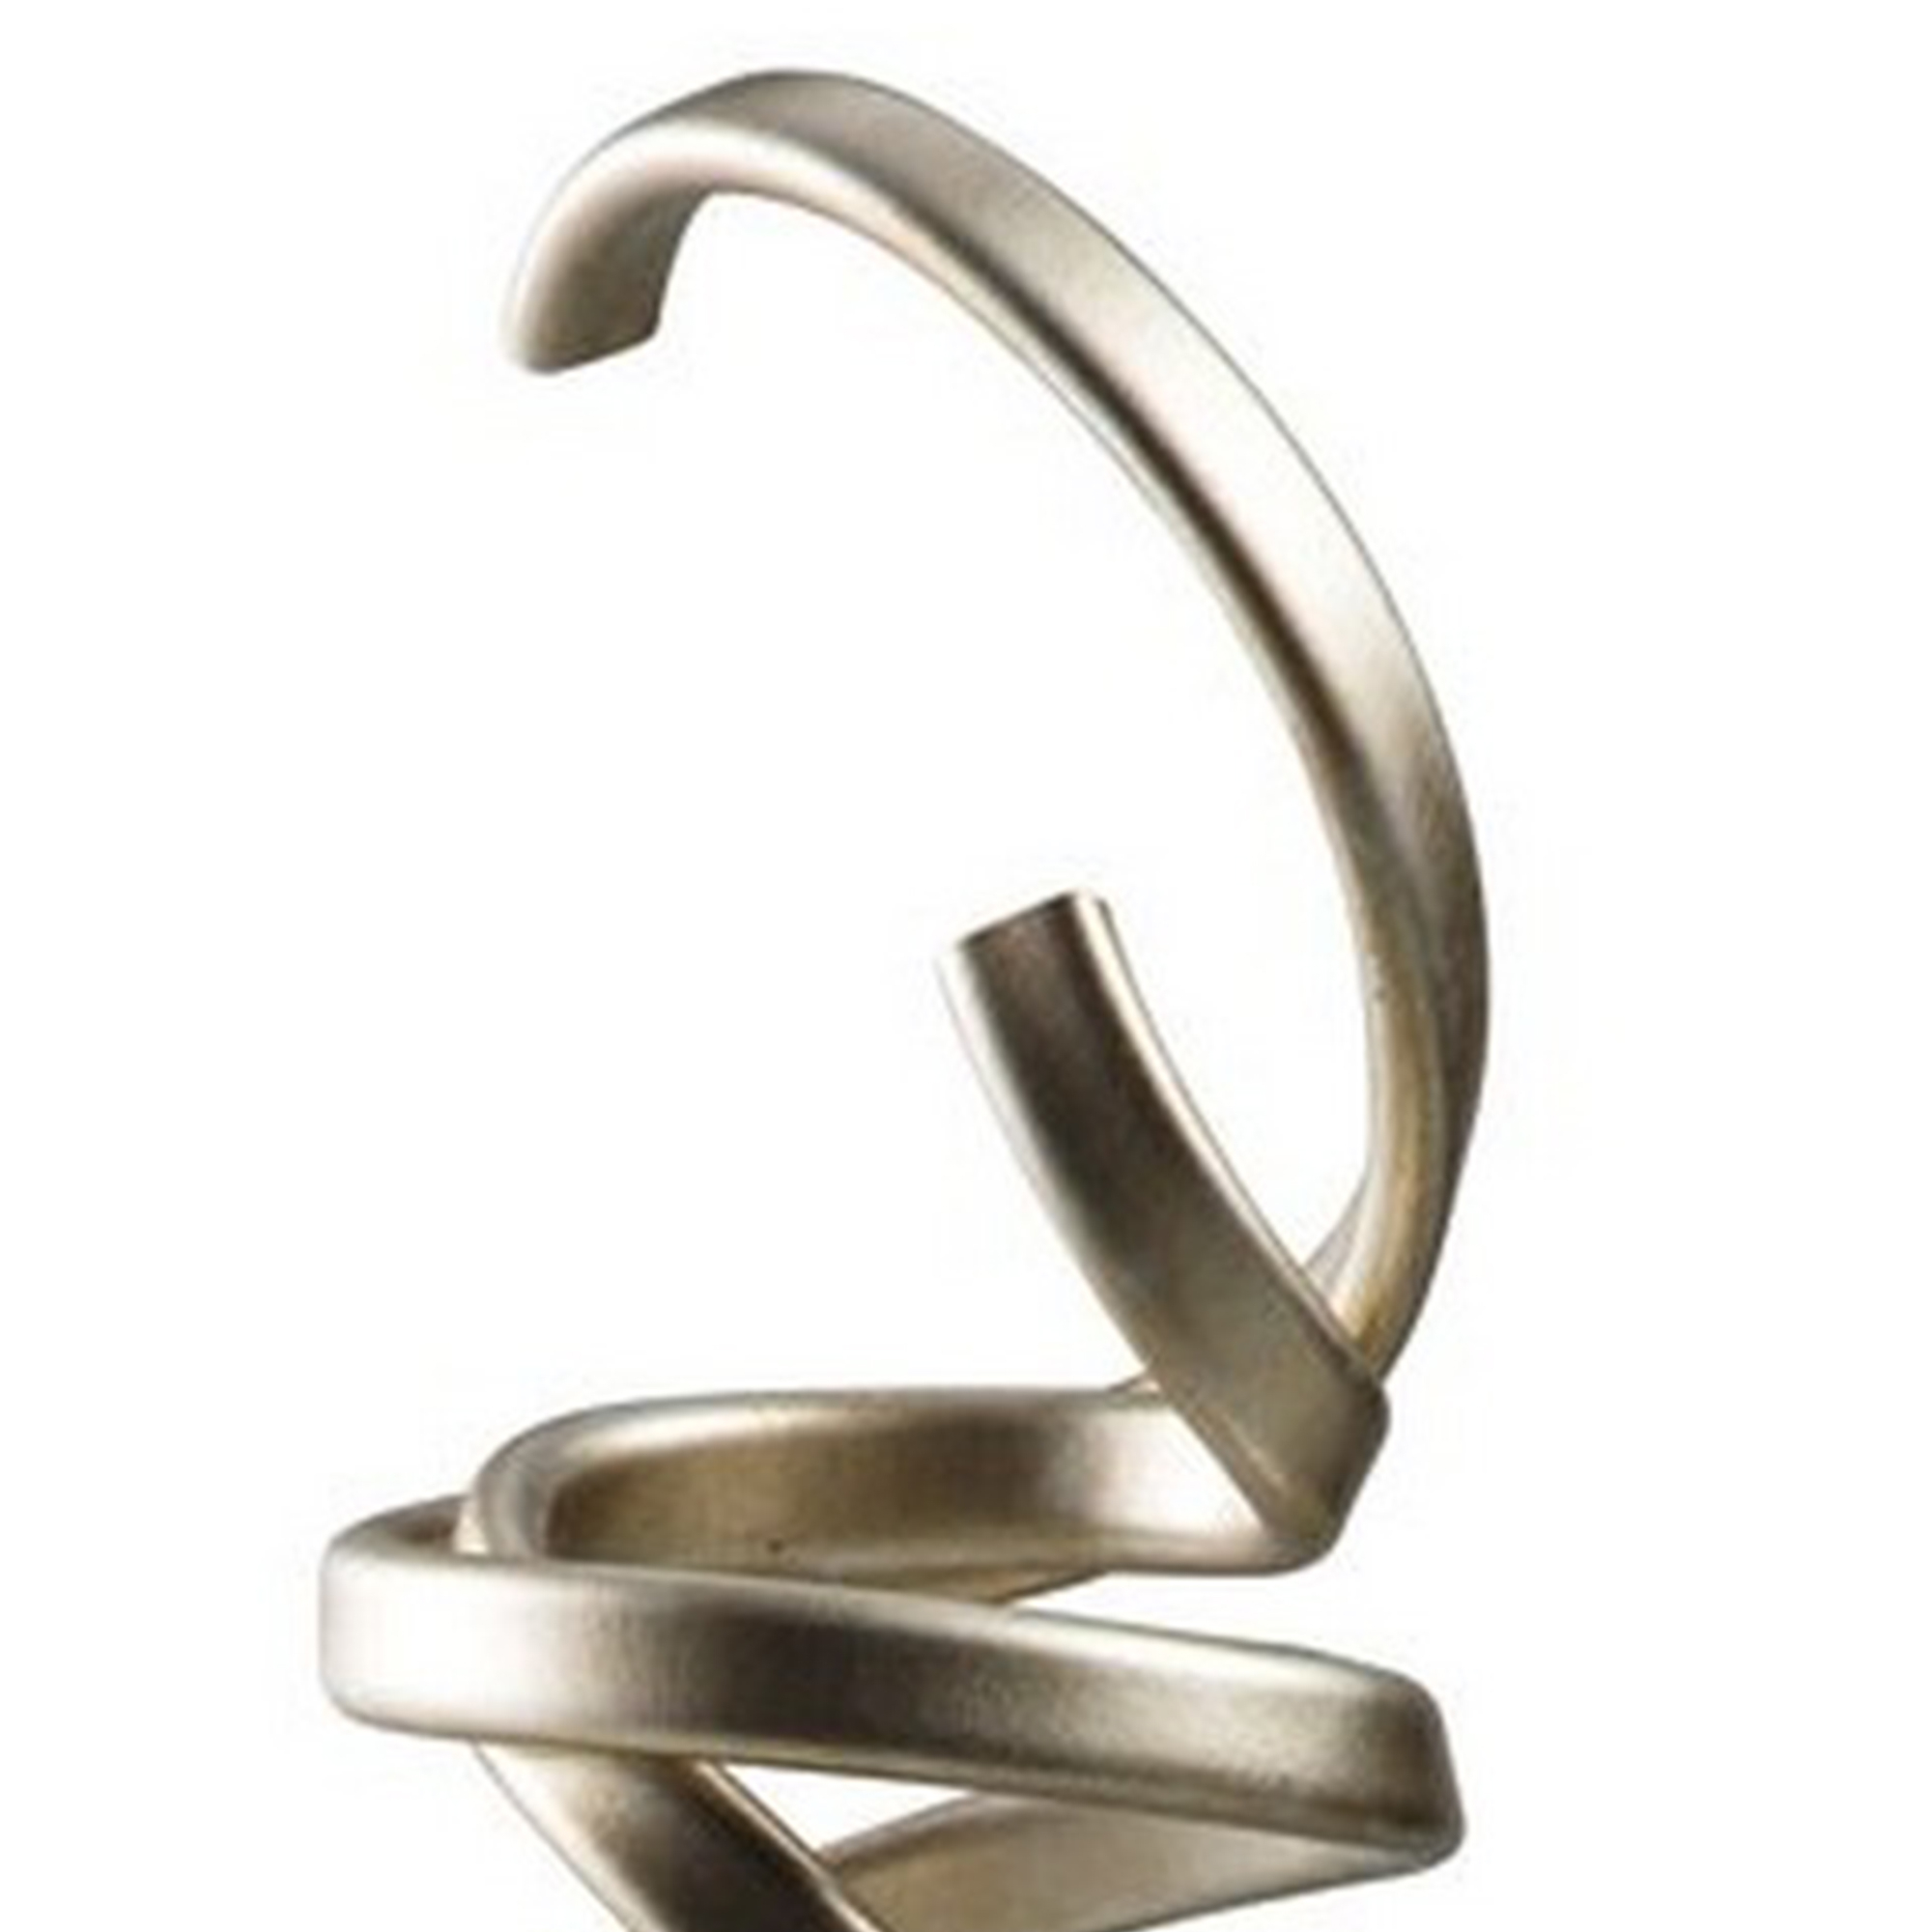 Twisted Scrolled Metal Sculpture With Marble Base, Champagne Gold And White- Saltoro Sherpi